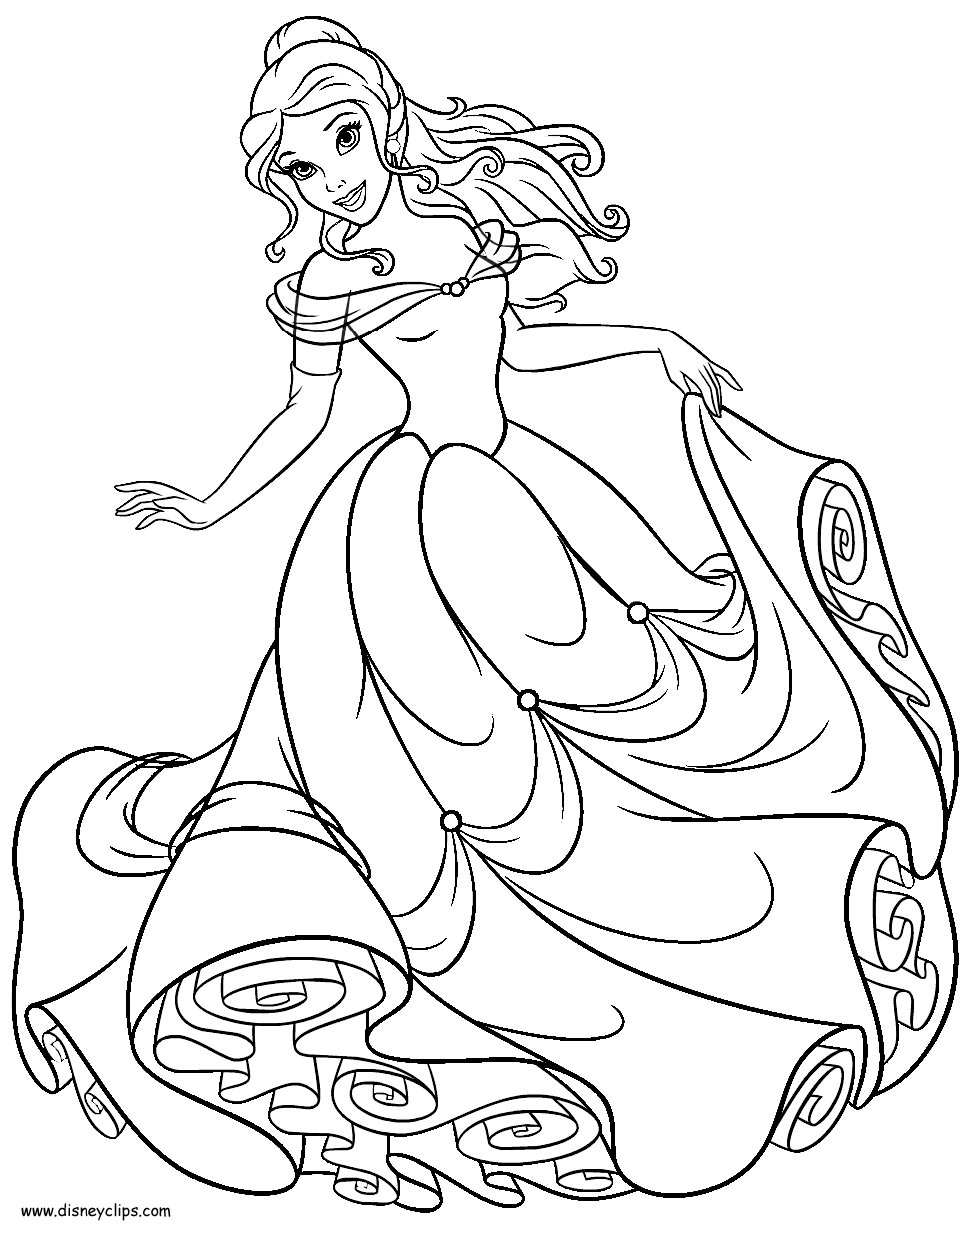 beauty and the beast coloring pages beauty and the beast coloring pages 3 disneyclipscom beauty beast pages coloring and the 